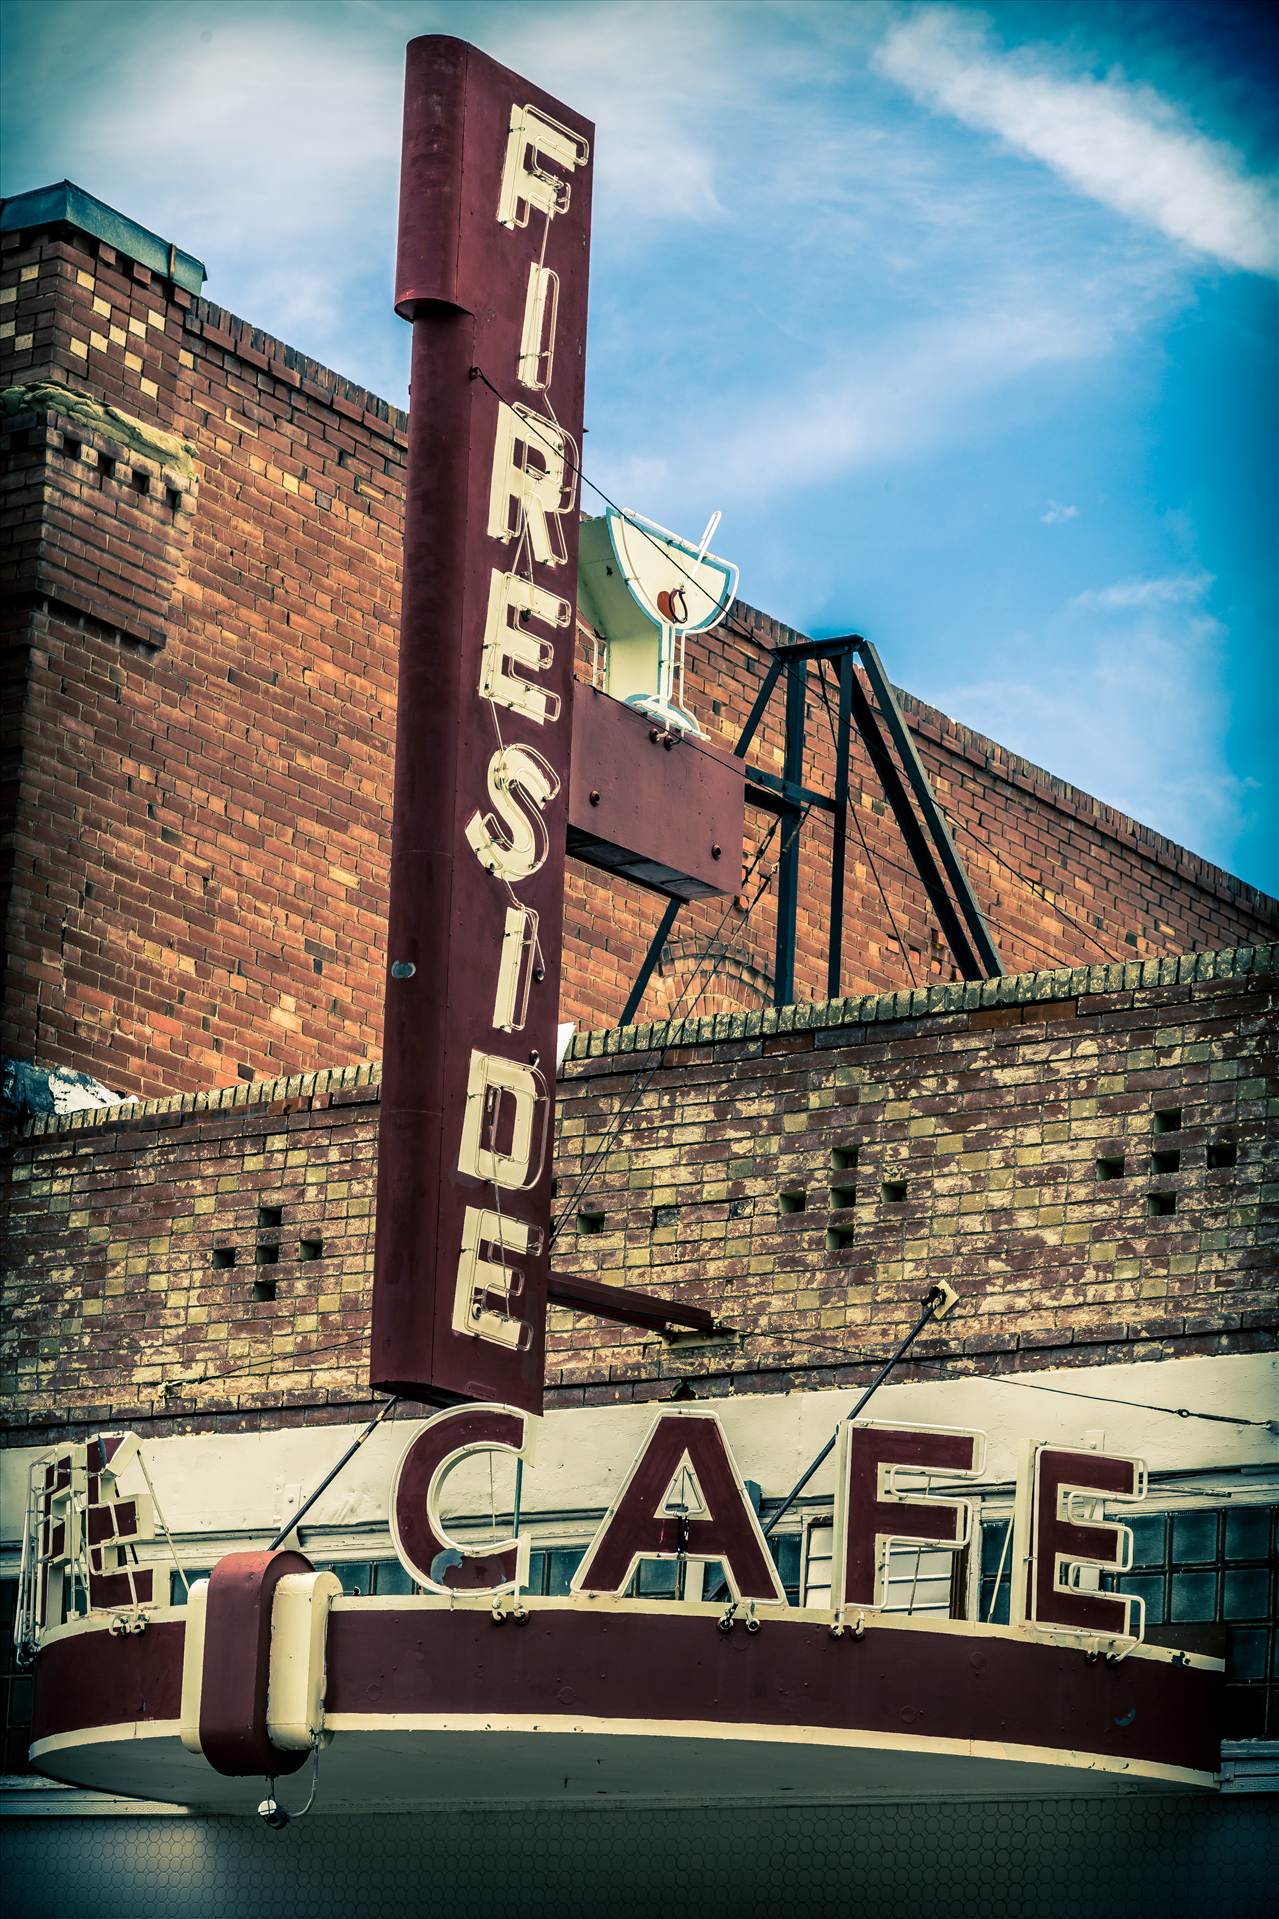 Fireside Cafe - An old diner in Fireside, Colorado. by Scott Smith Photos